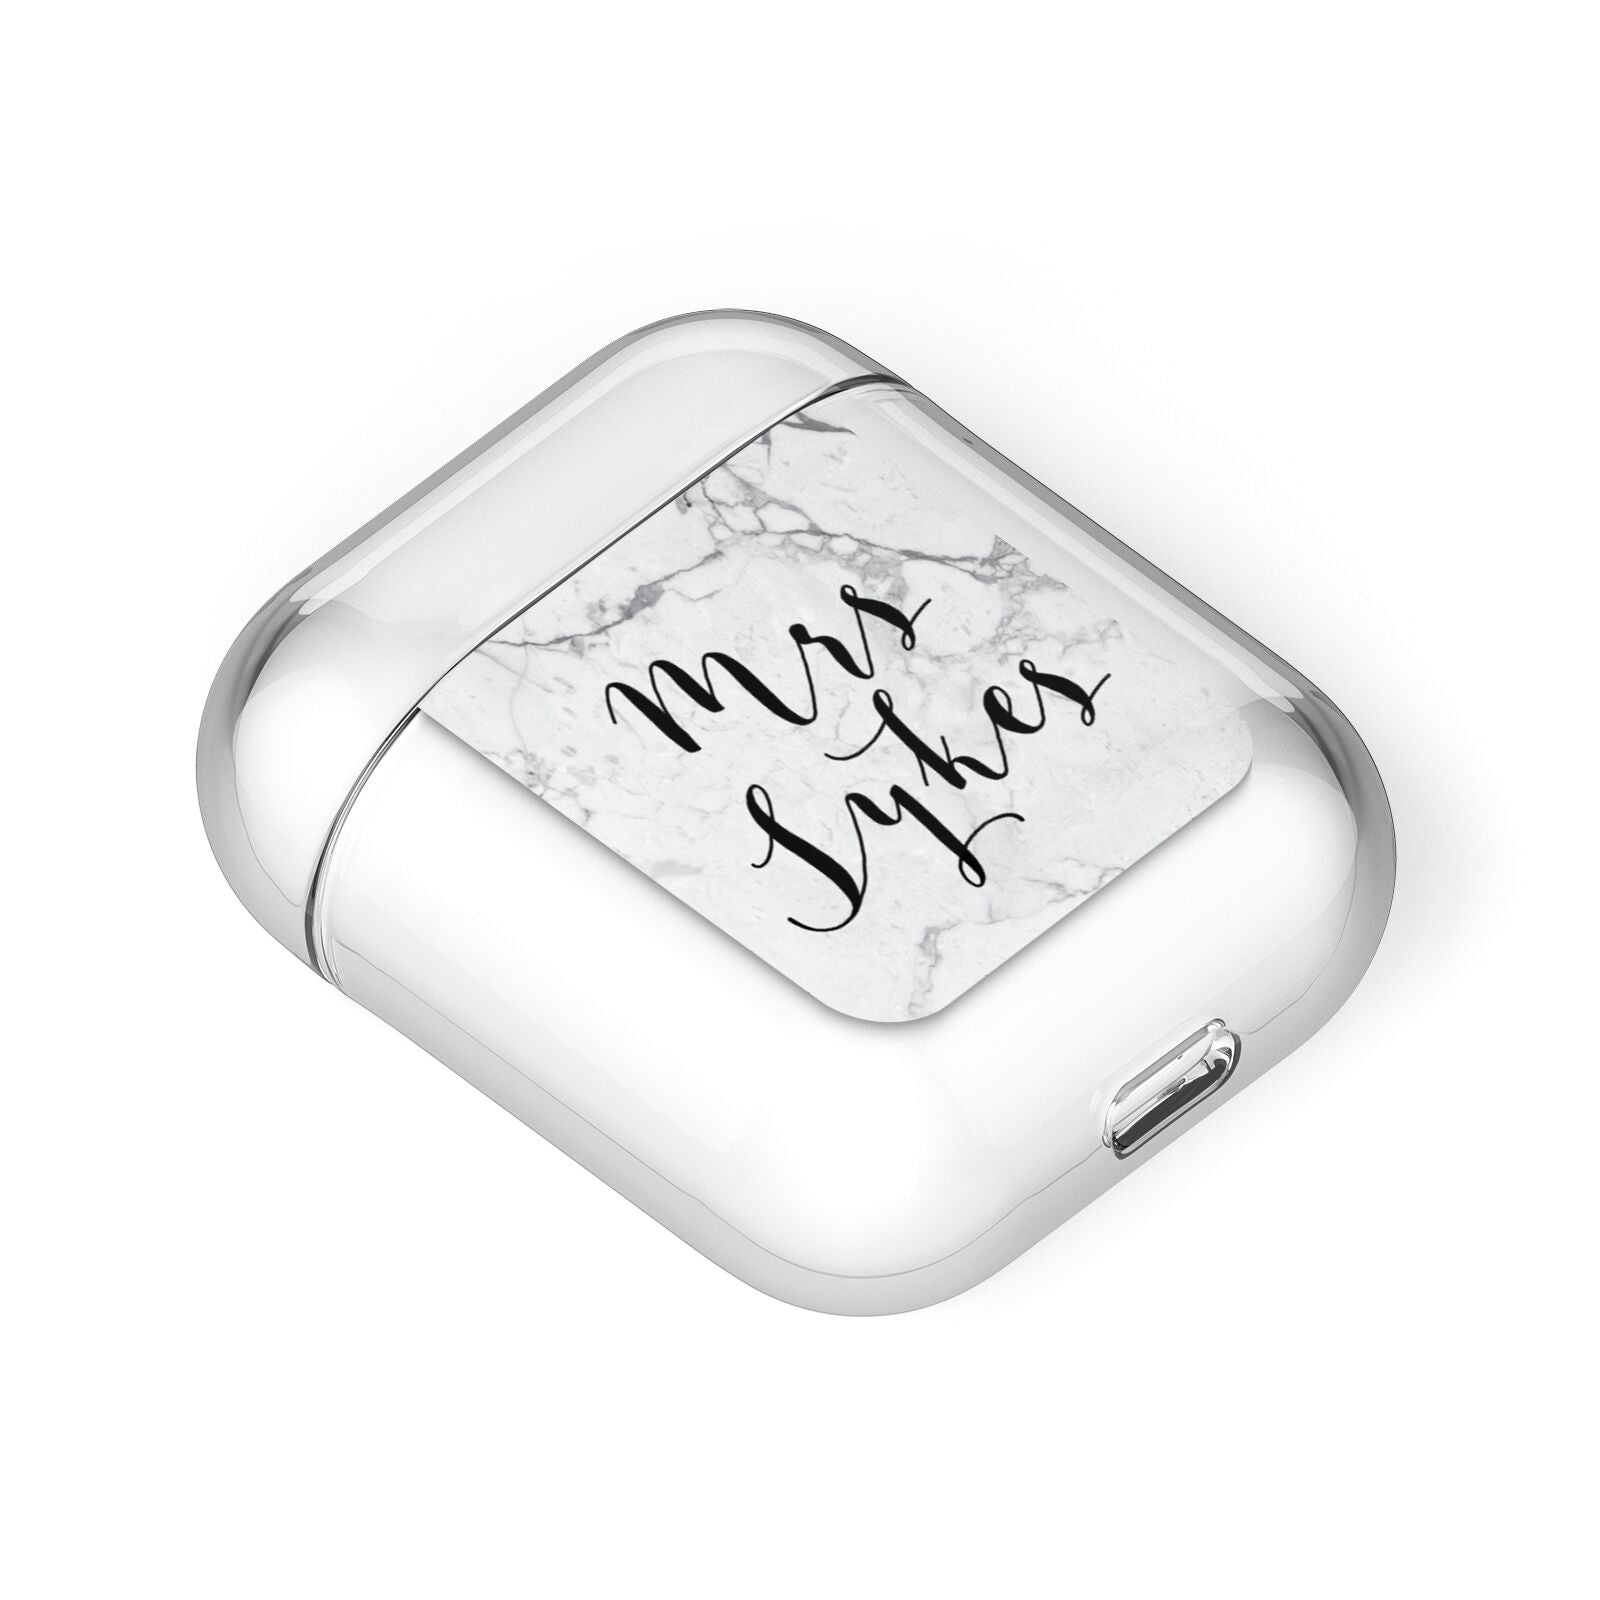 Surname Personalised Marble AirPods Case Laid Flat